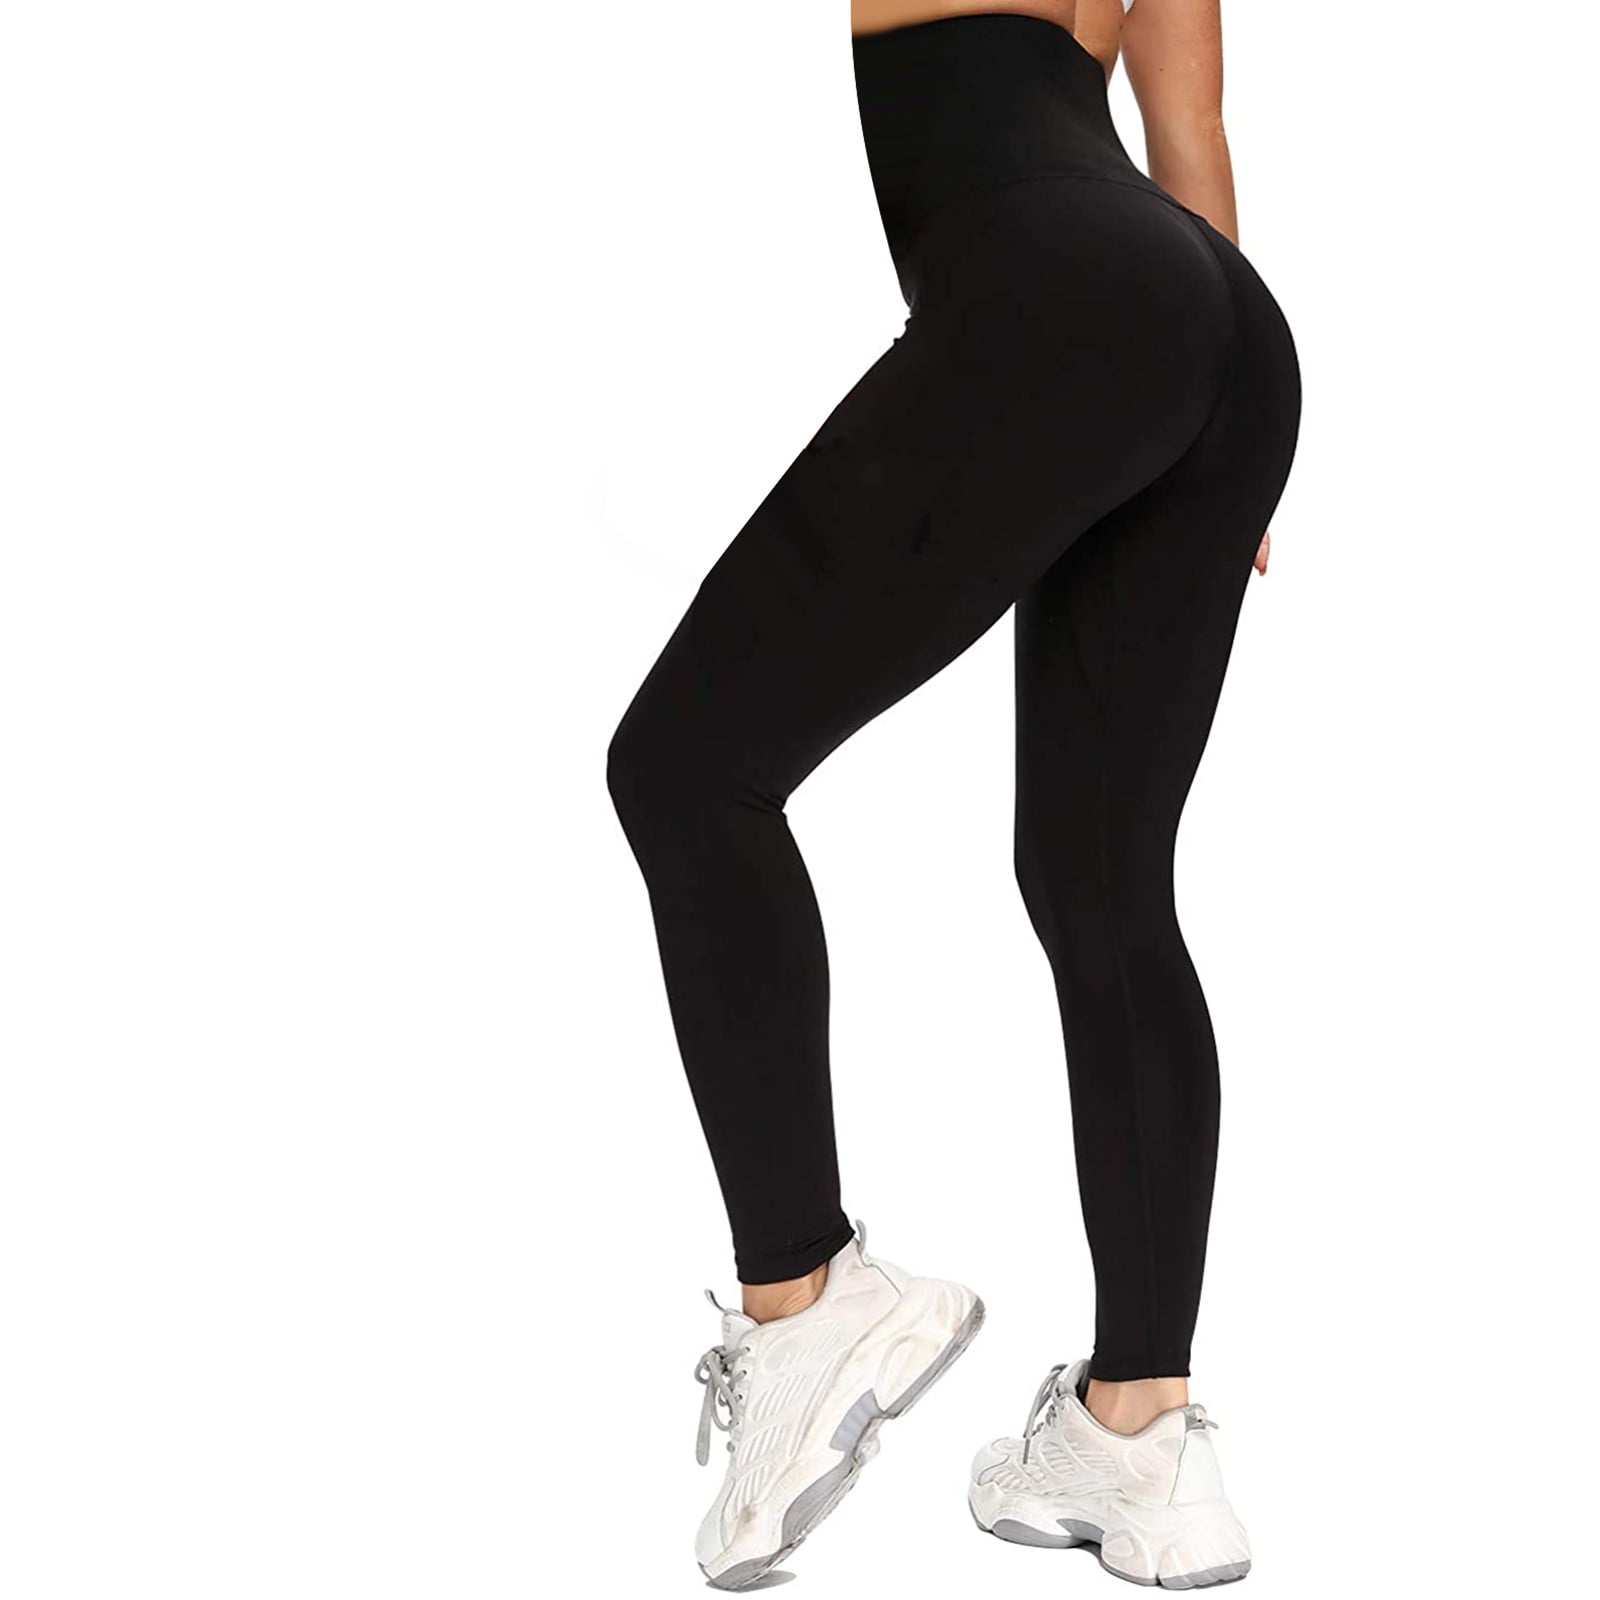 Jalioing Yoga Pants for Women Stretchy High Waist Skinny Ankle